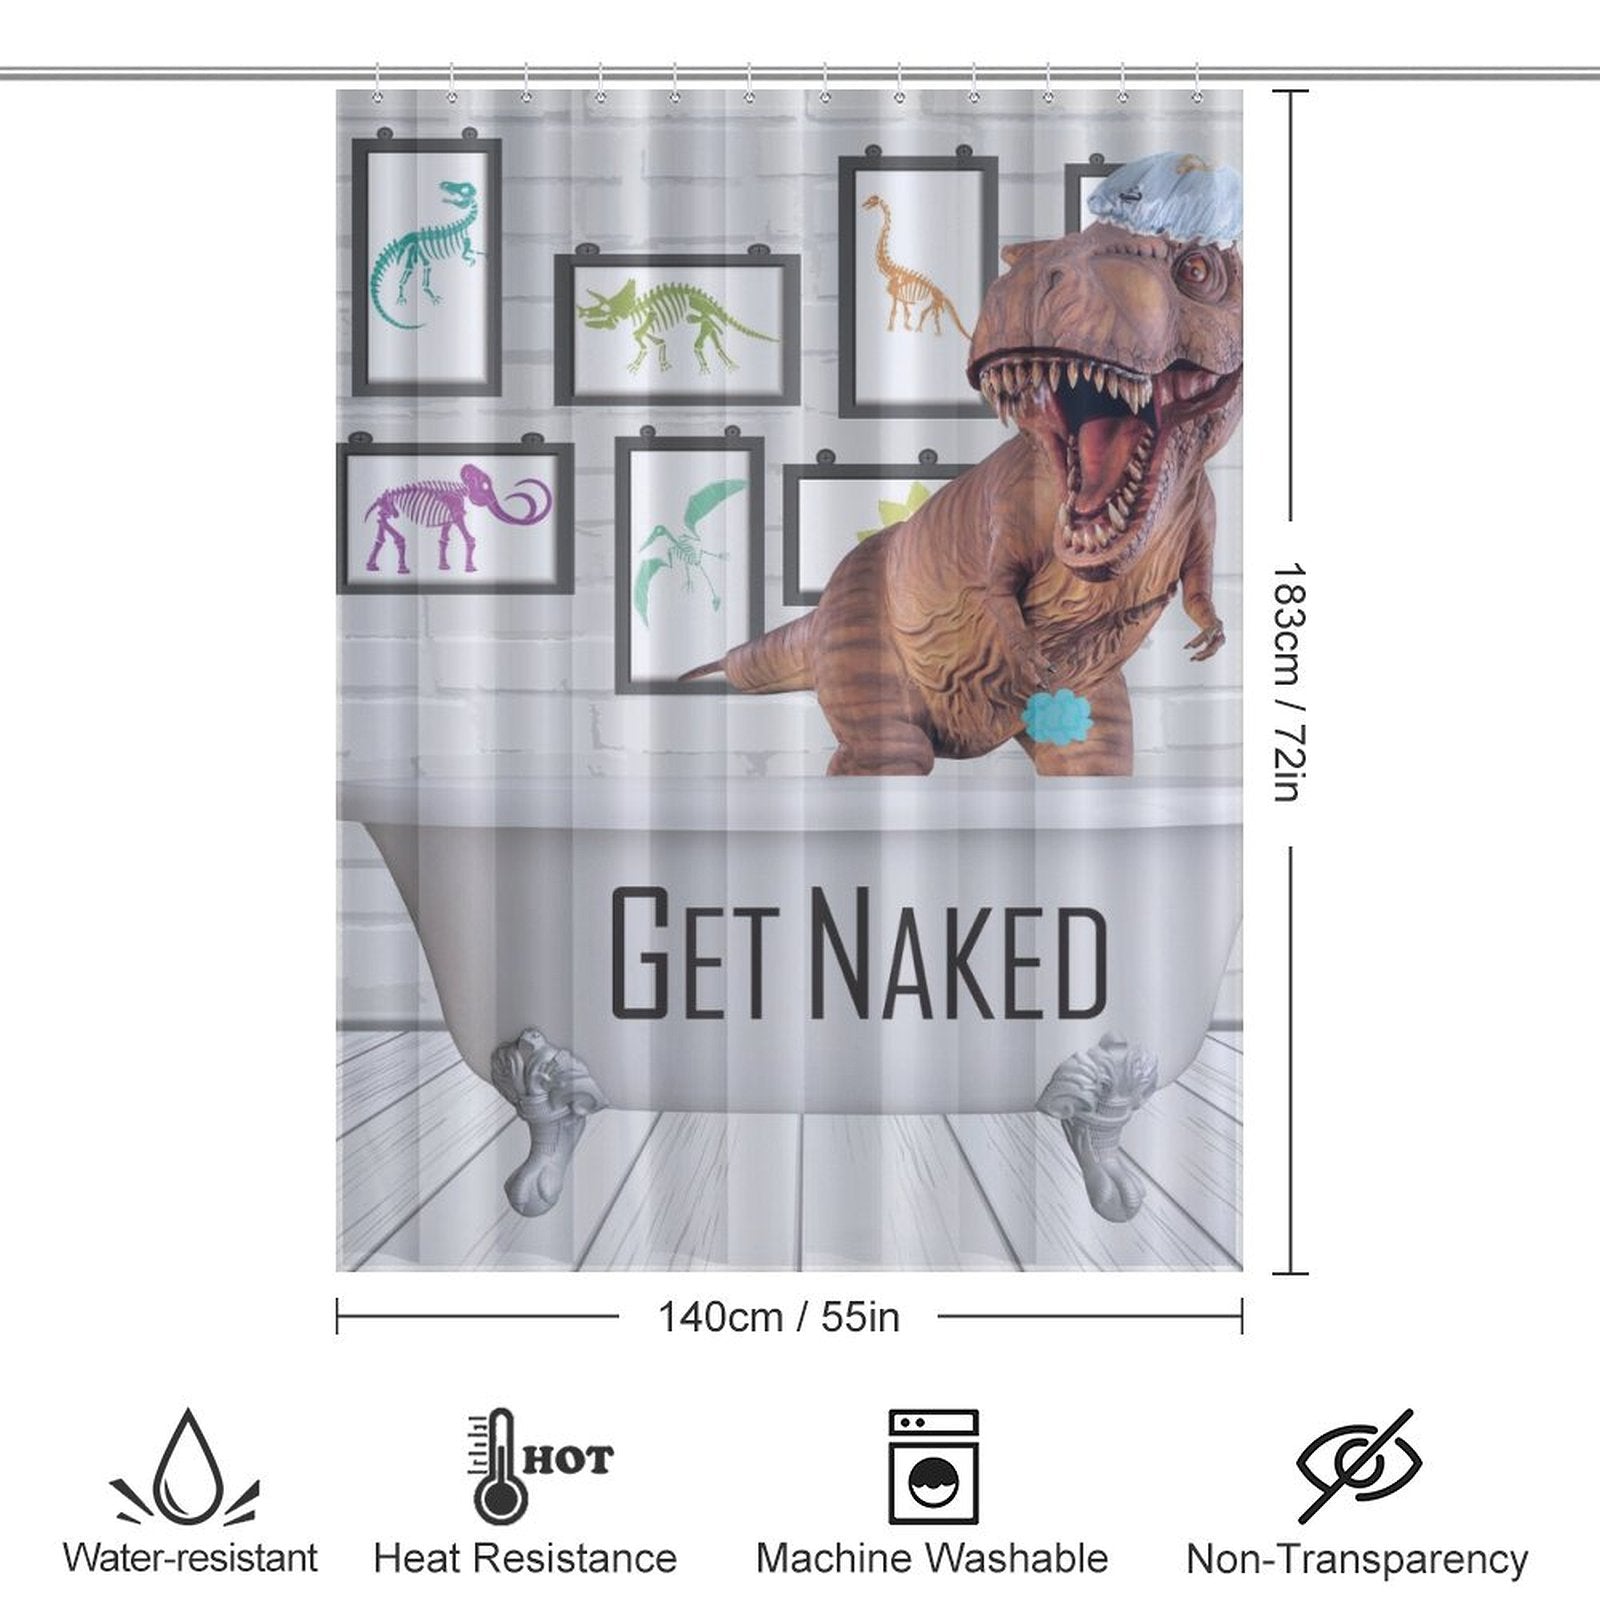 Get the Funny Dinosaur Get Naked Shower Curtain-Cottoncat by Cotton Cat with a funny dinosaur design, measuring 183cm x 140cm. This whimsical piece of dinosaur bathroom decor boasts water resistance, heat resistance, machine washability, and non-transparency. Perfect for adding a playful touch to your bathroom!